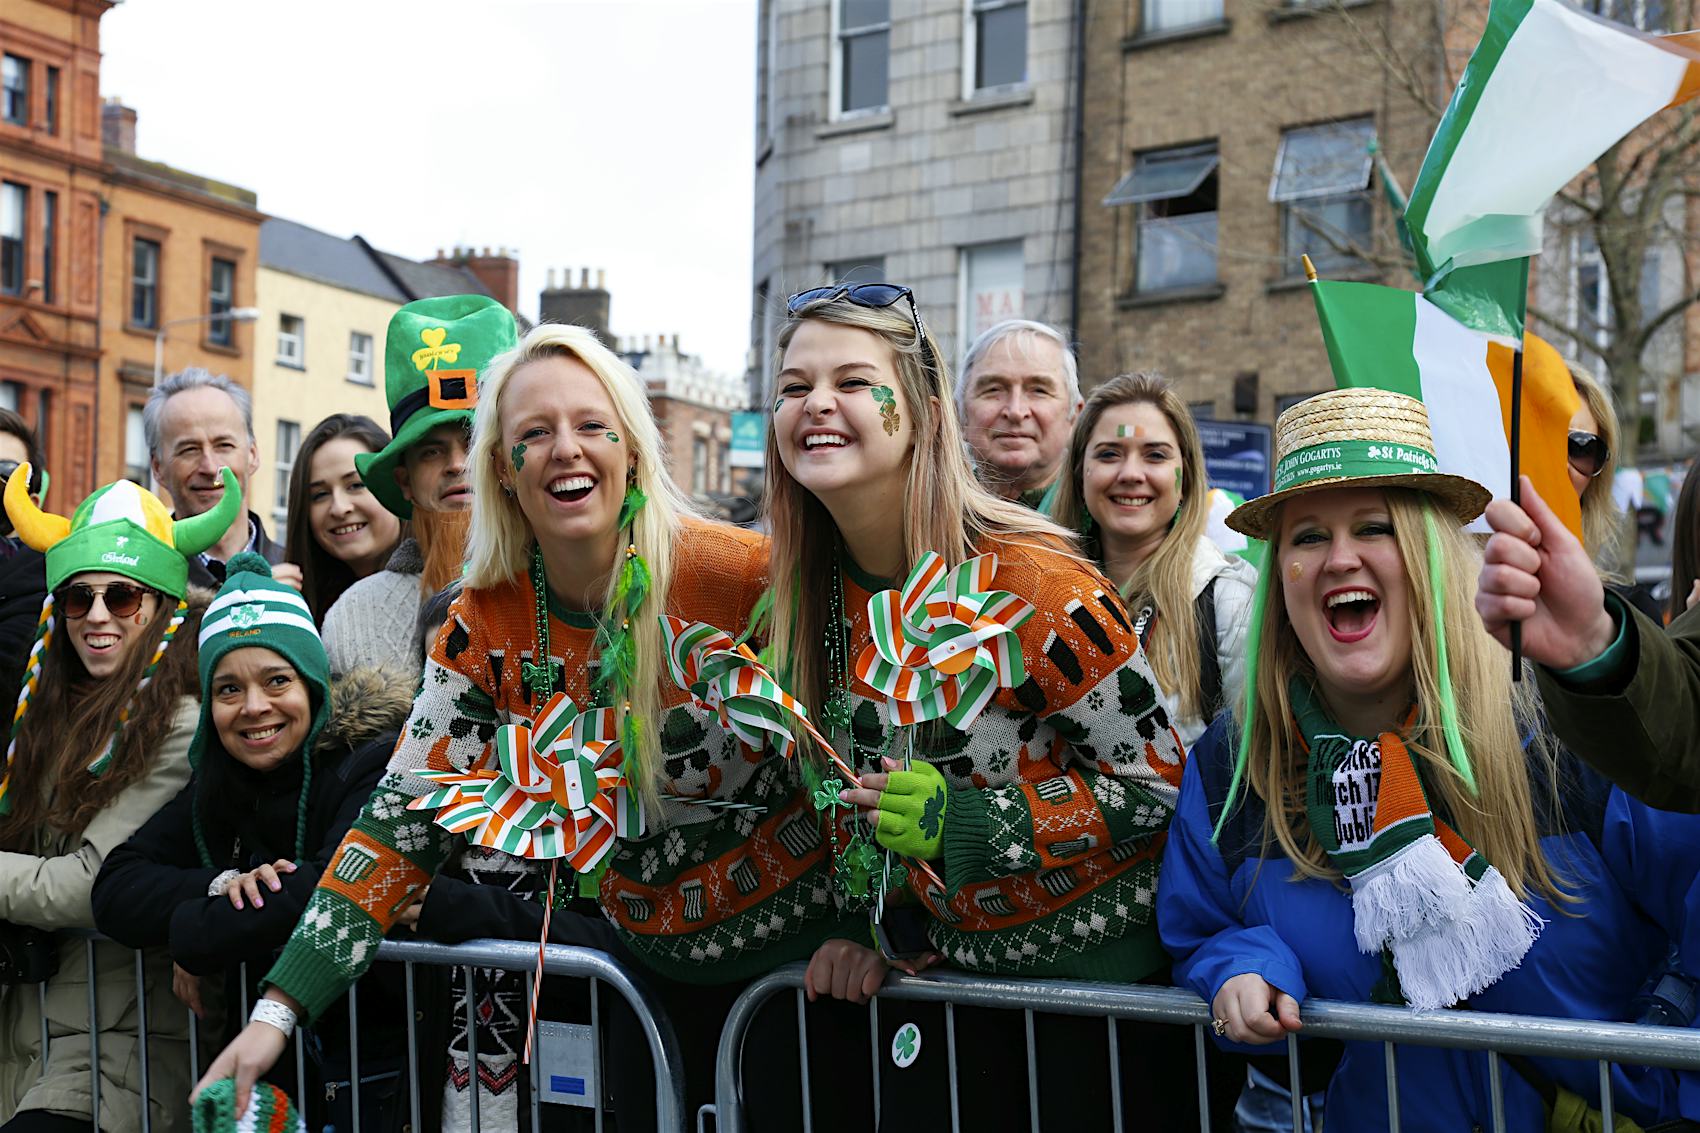 Group of people at St Patrick's Day in Dublin